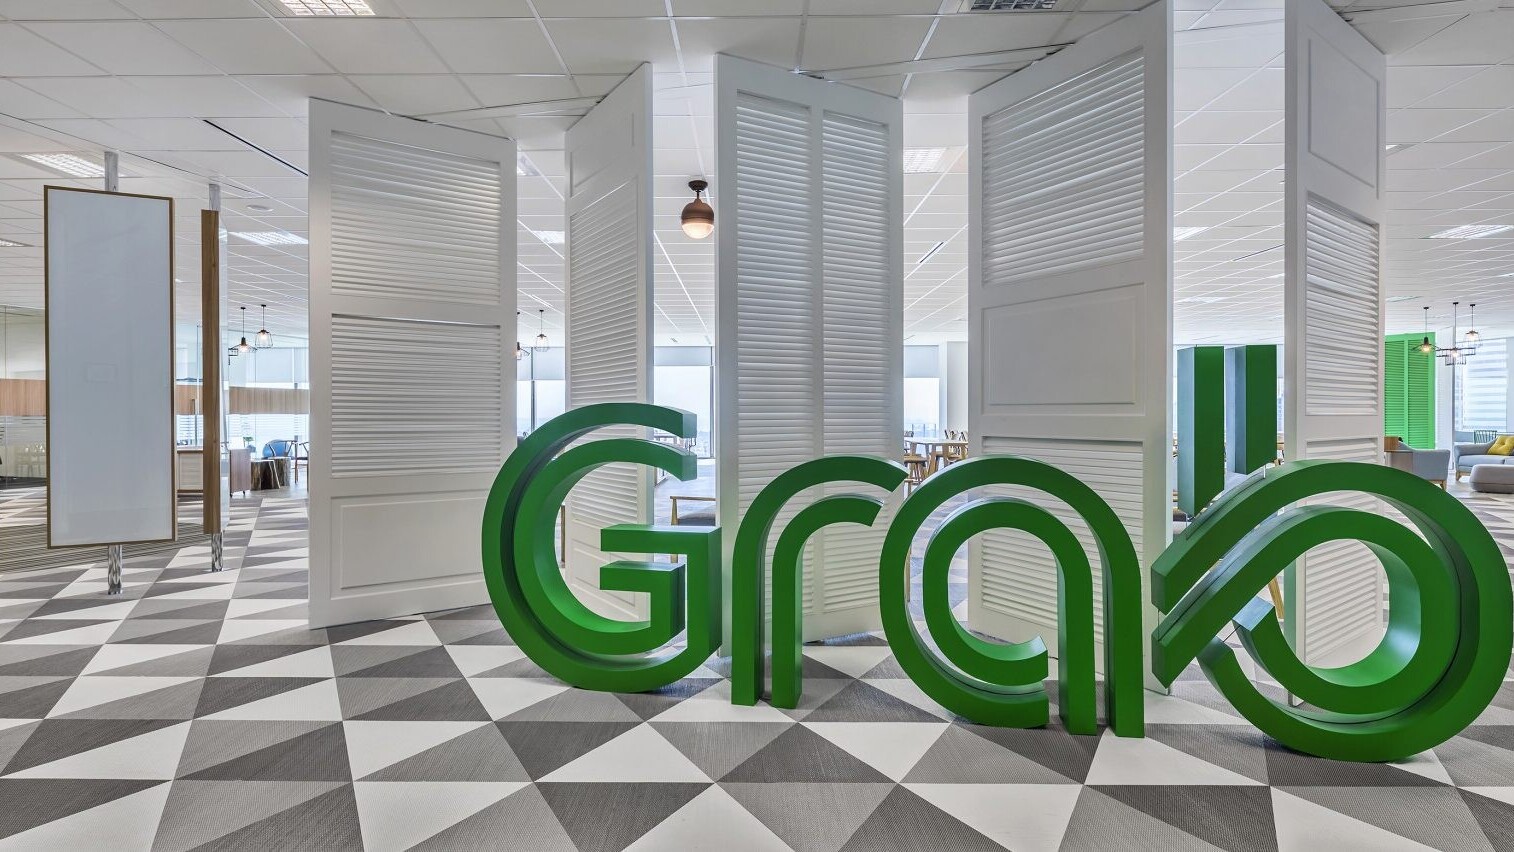 Grab’s SPAC merger values the company at a whopping $40B